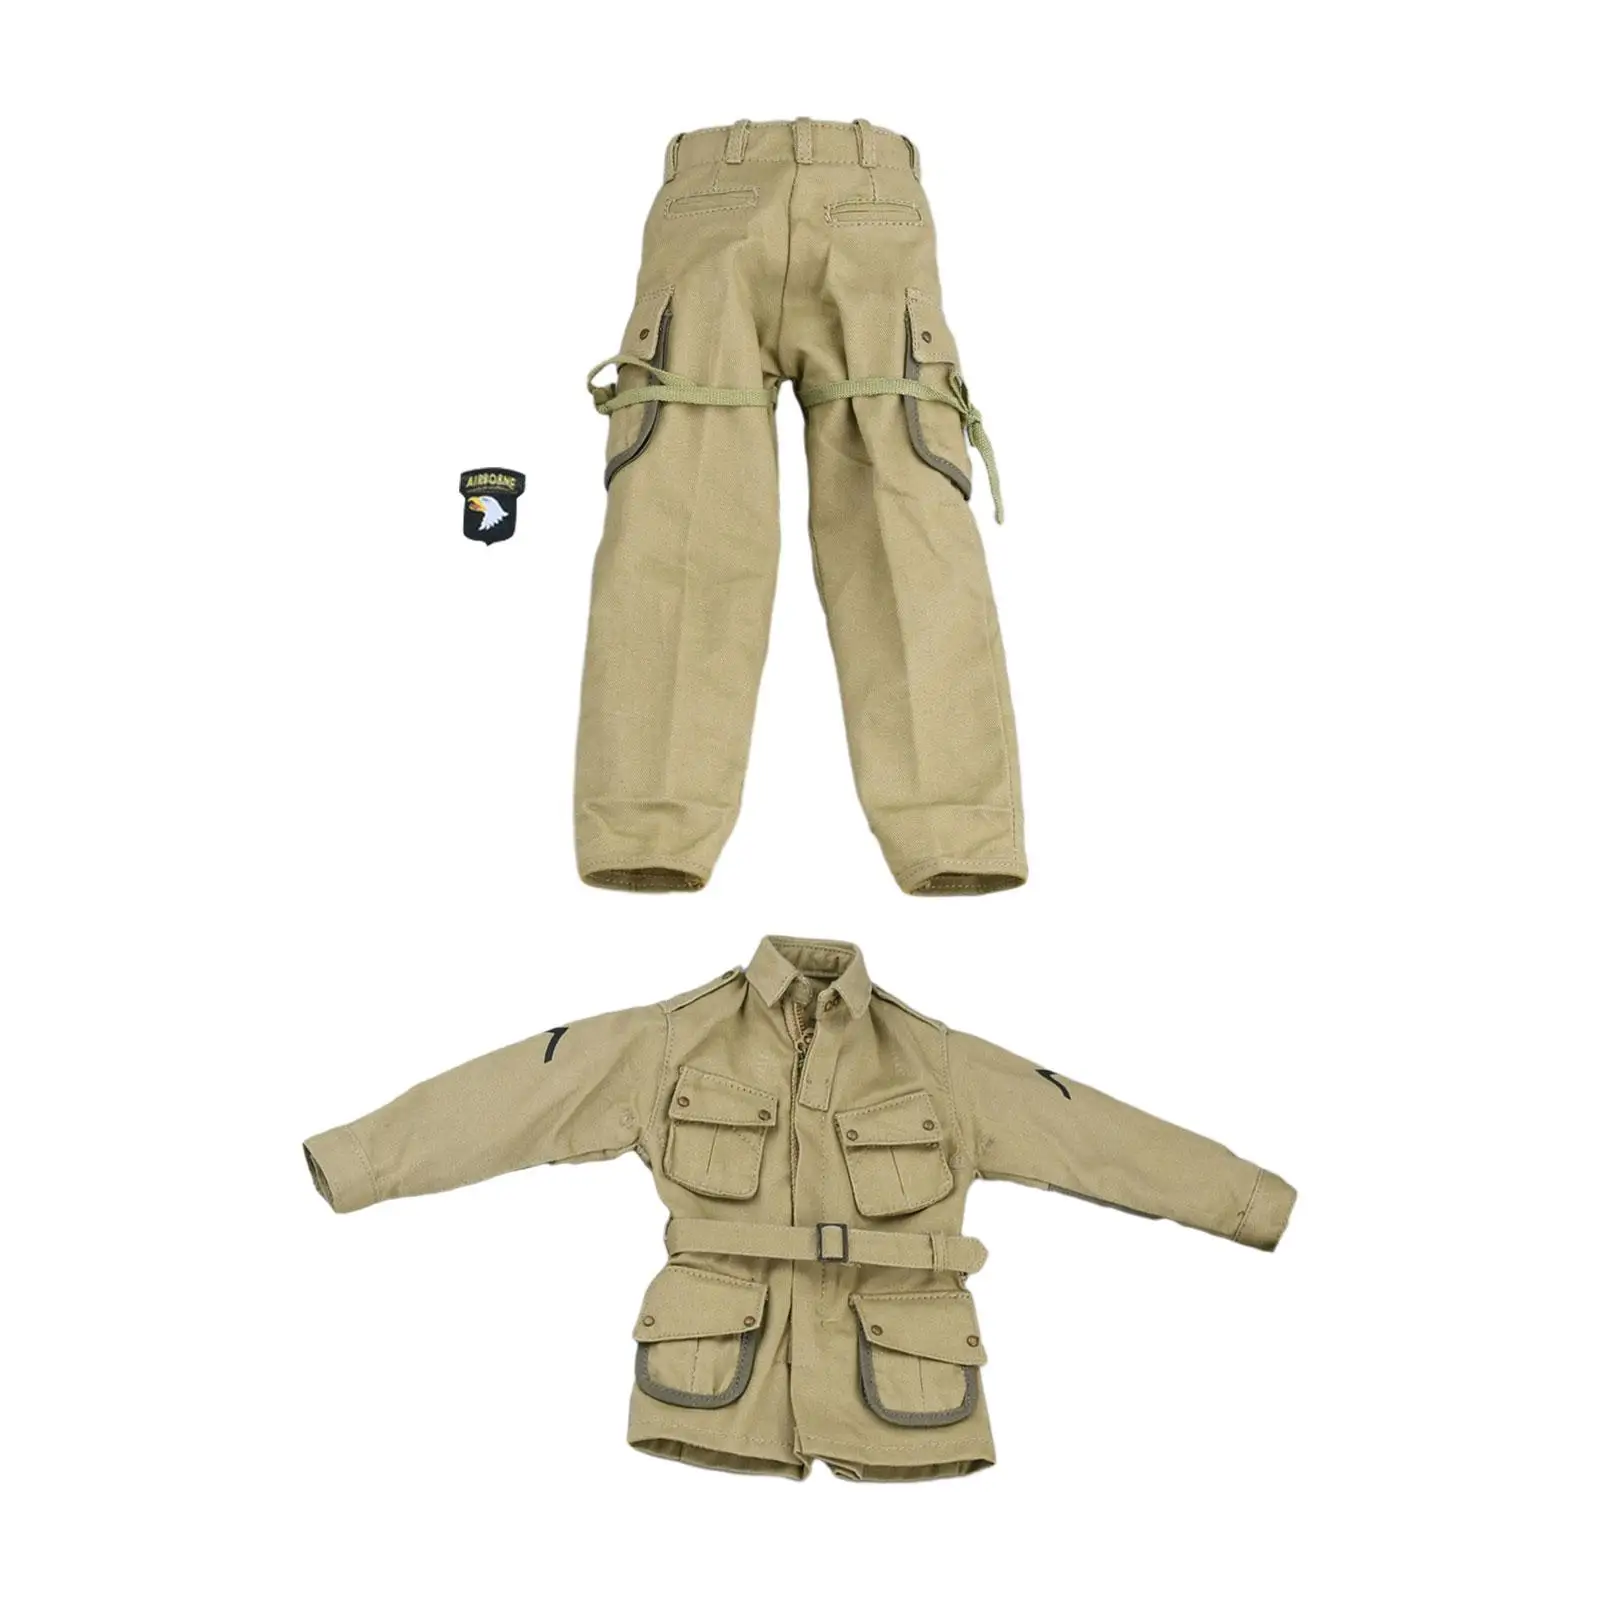 1/6 Scale Clothes Miniature Soldier Costume for 12`` Action Figures Costume